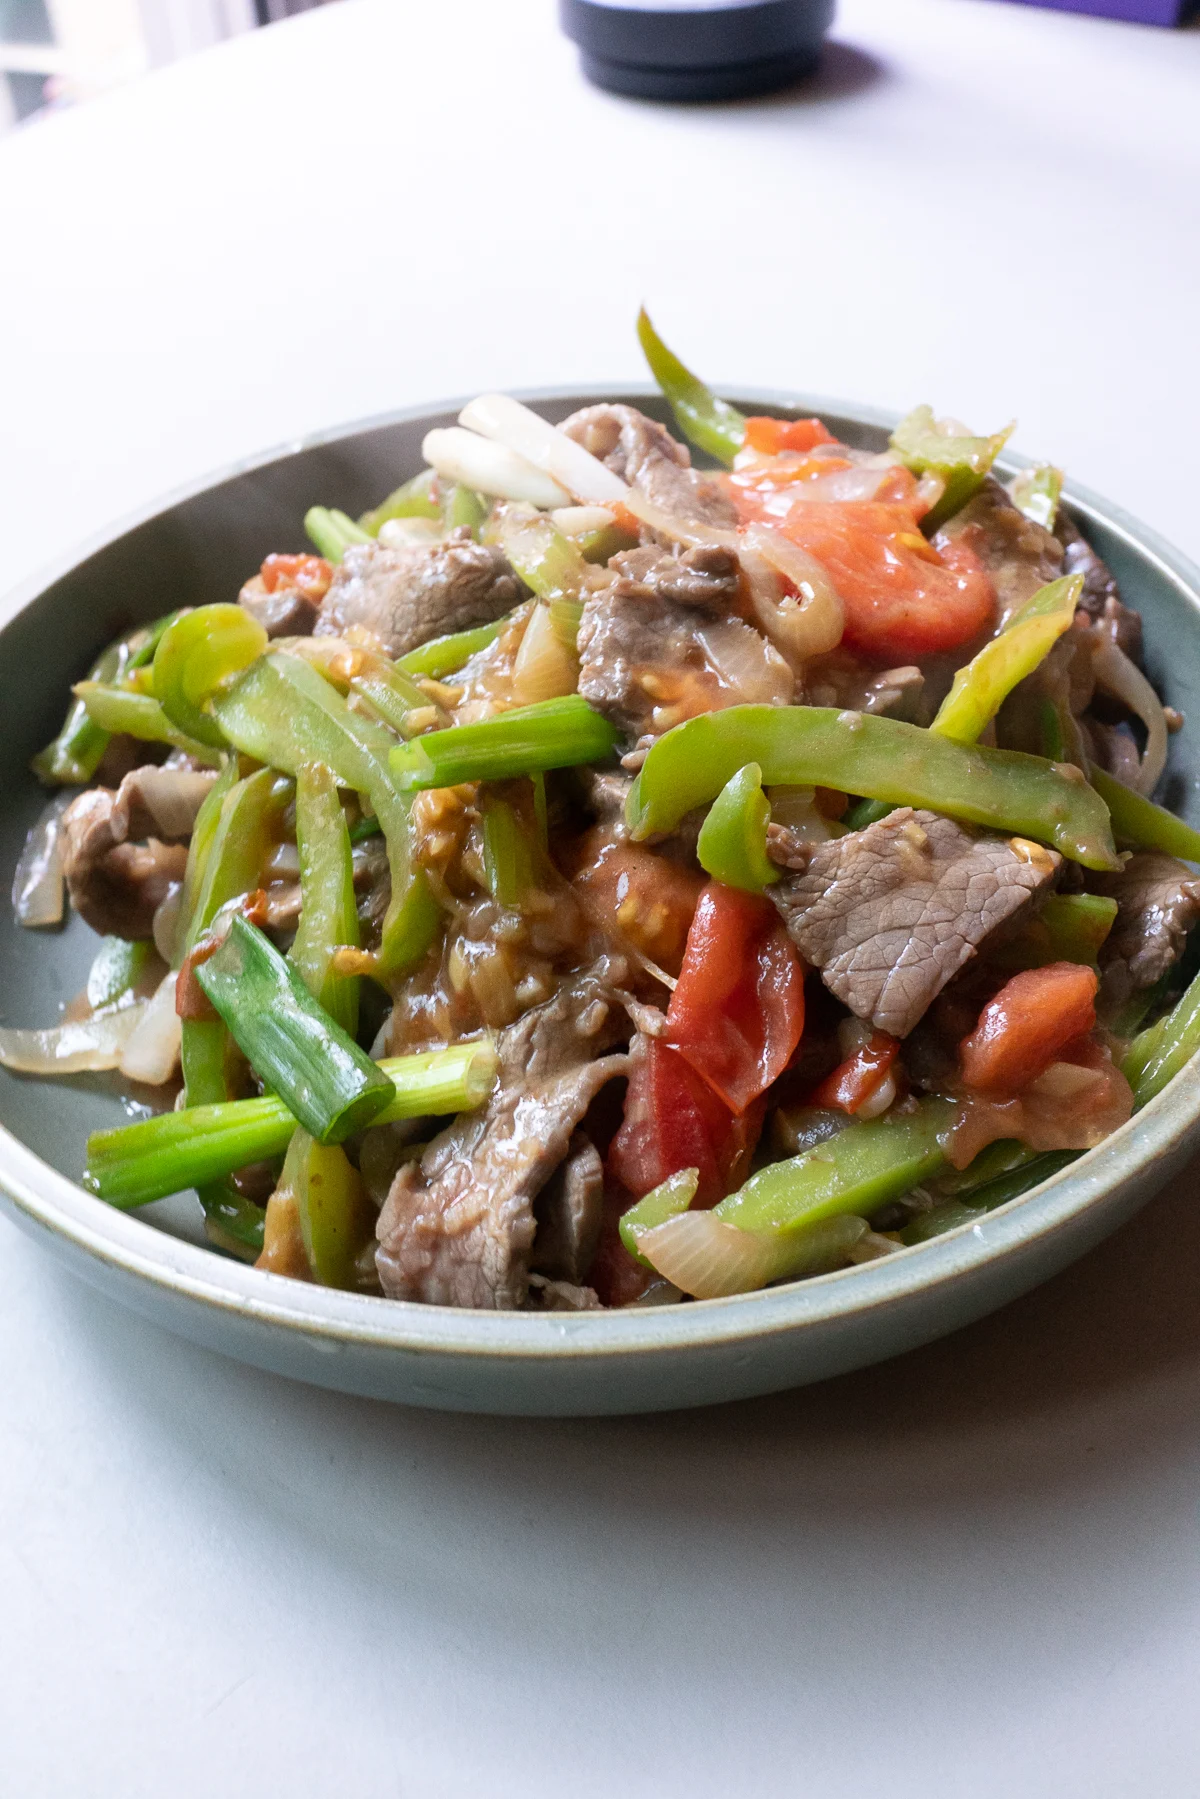 The prepared beef tomato dish, ready to serve with rice.